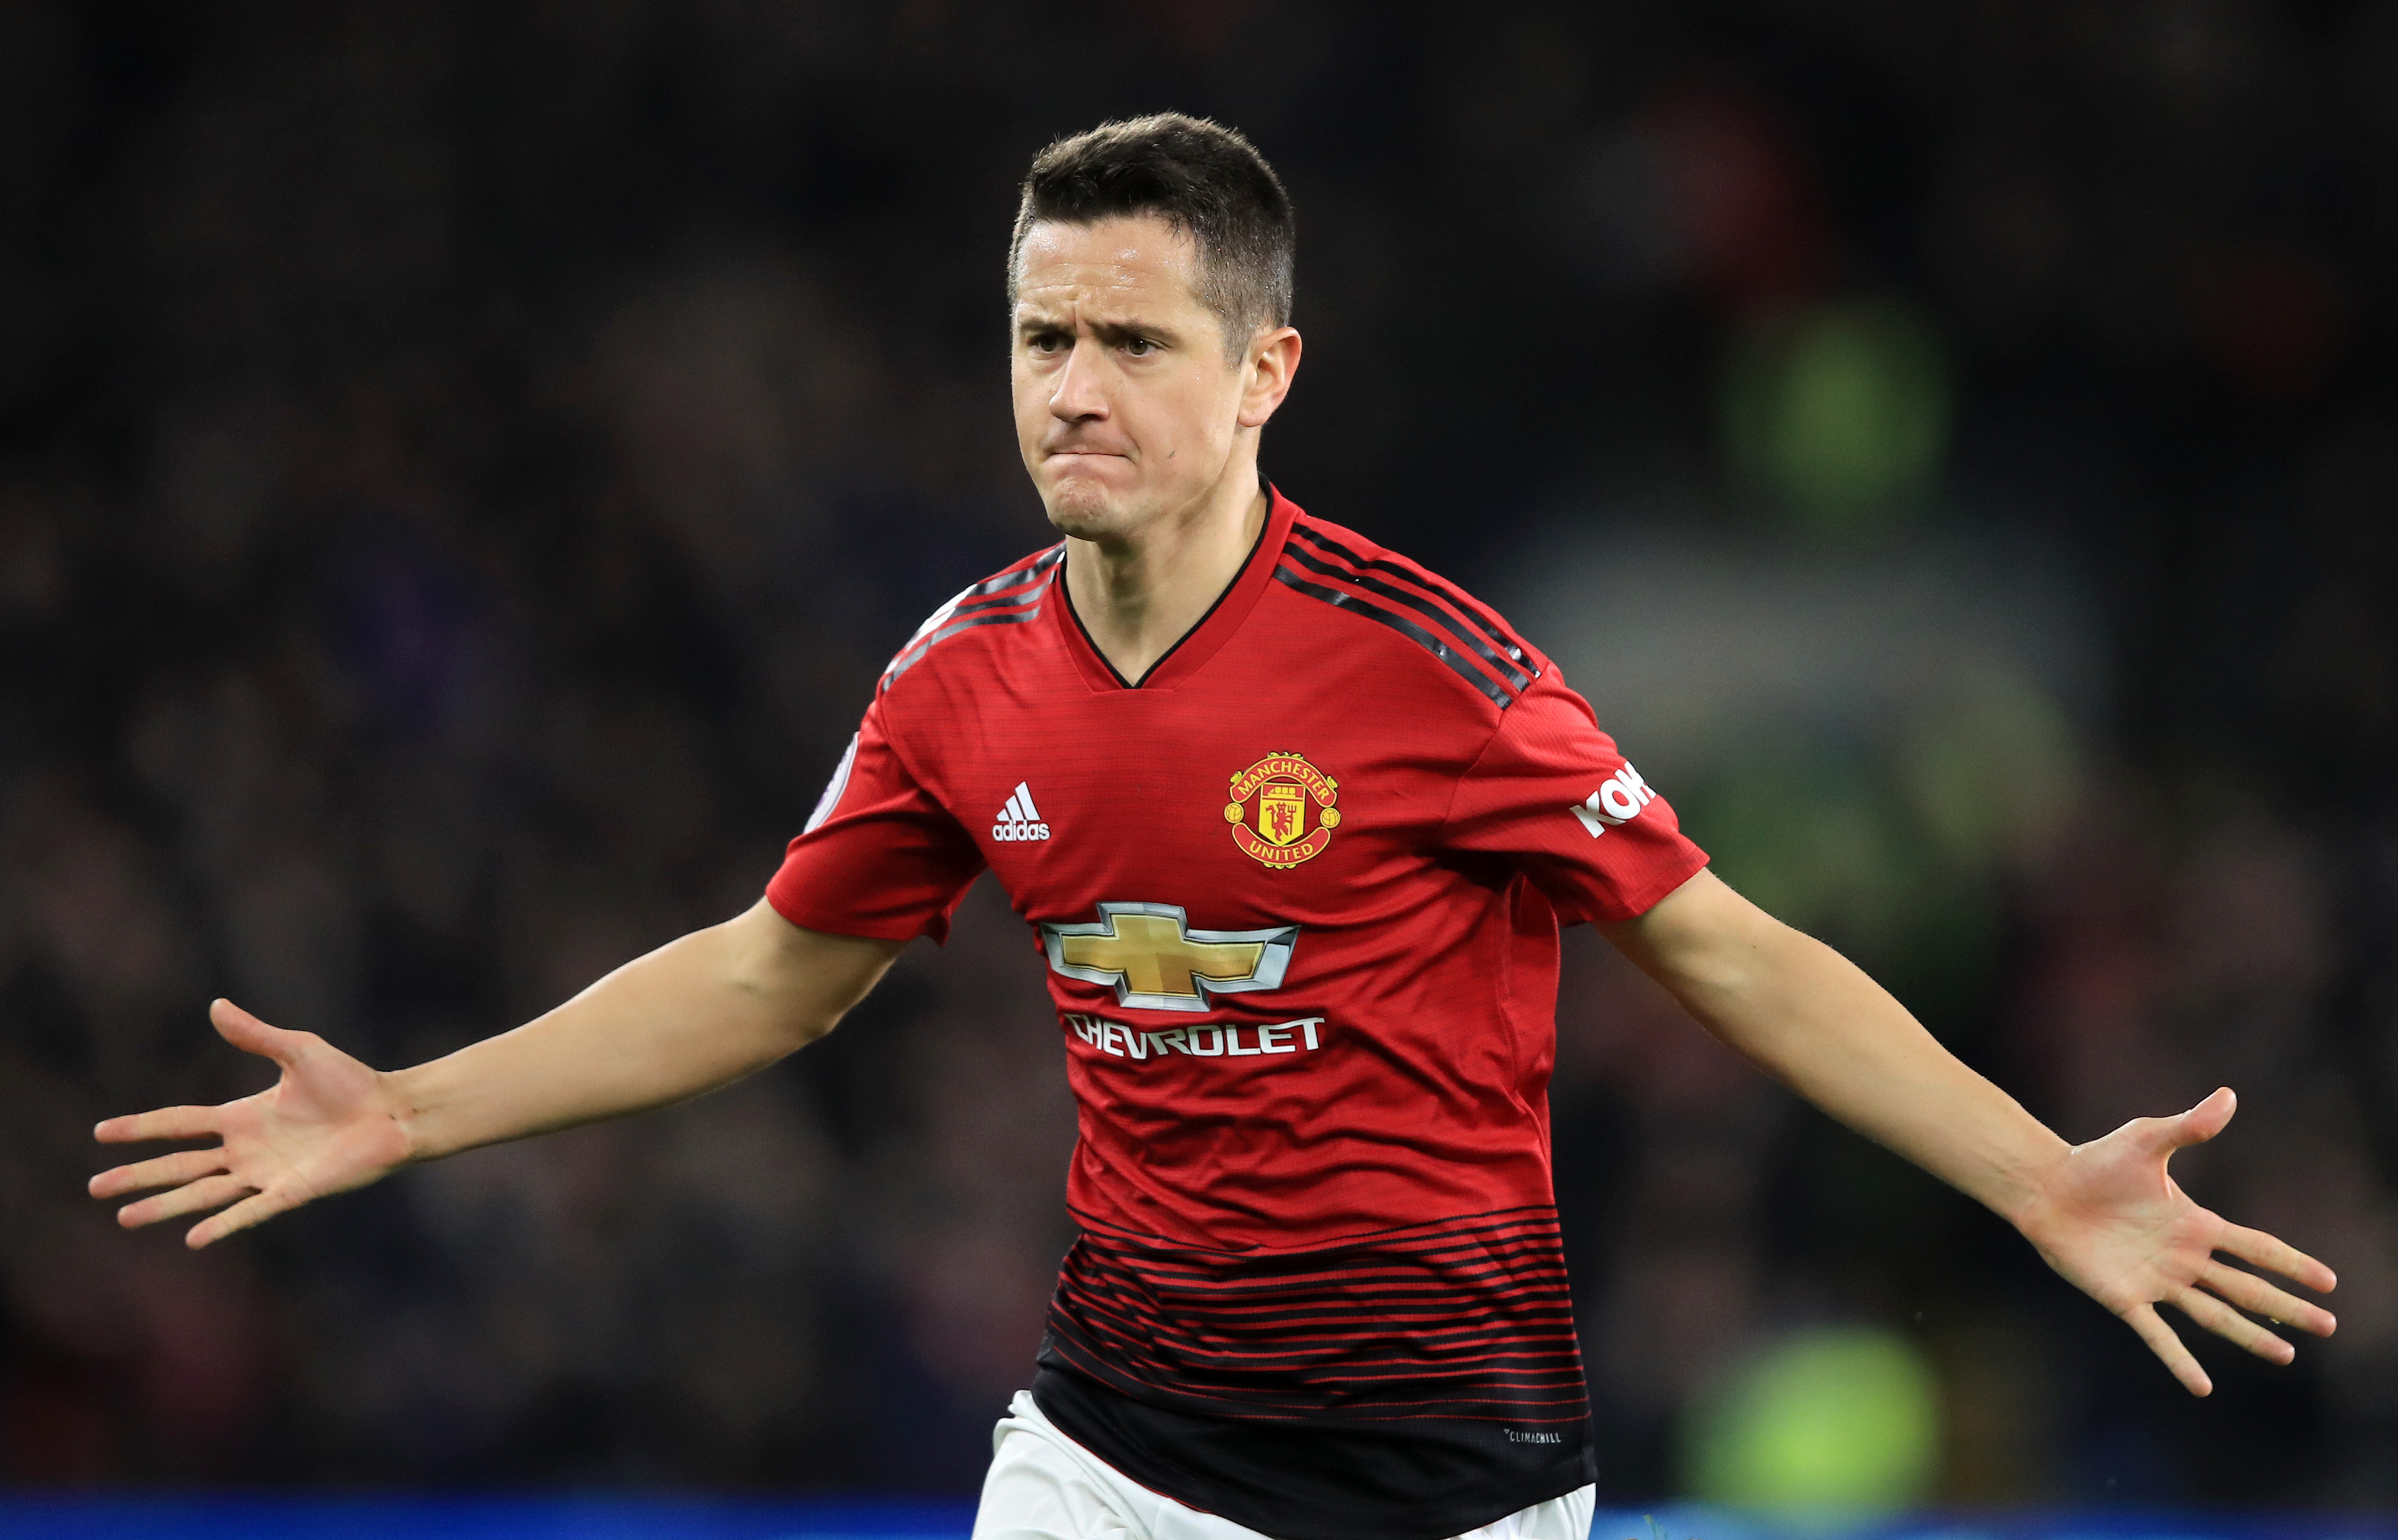 CARDIFF, WALES - DECEMBER 22:  Ander Herrera of Manchester United celebrates after scoring his team's second goal during the Premier League match between Cardiff City and Manchester United at Cardiff City Stadium on December 22, 2018 in Cardiff, United Kingdom.  (Photo by Marc Atkins/Getty Images)